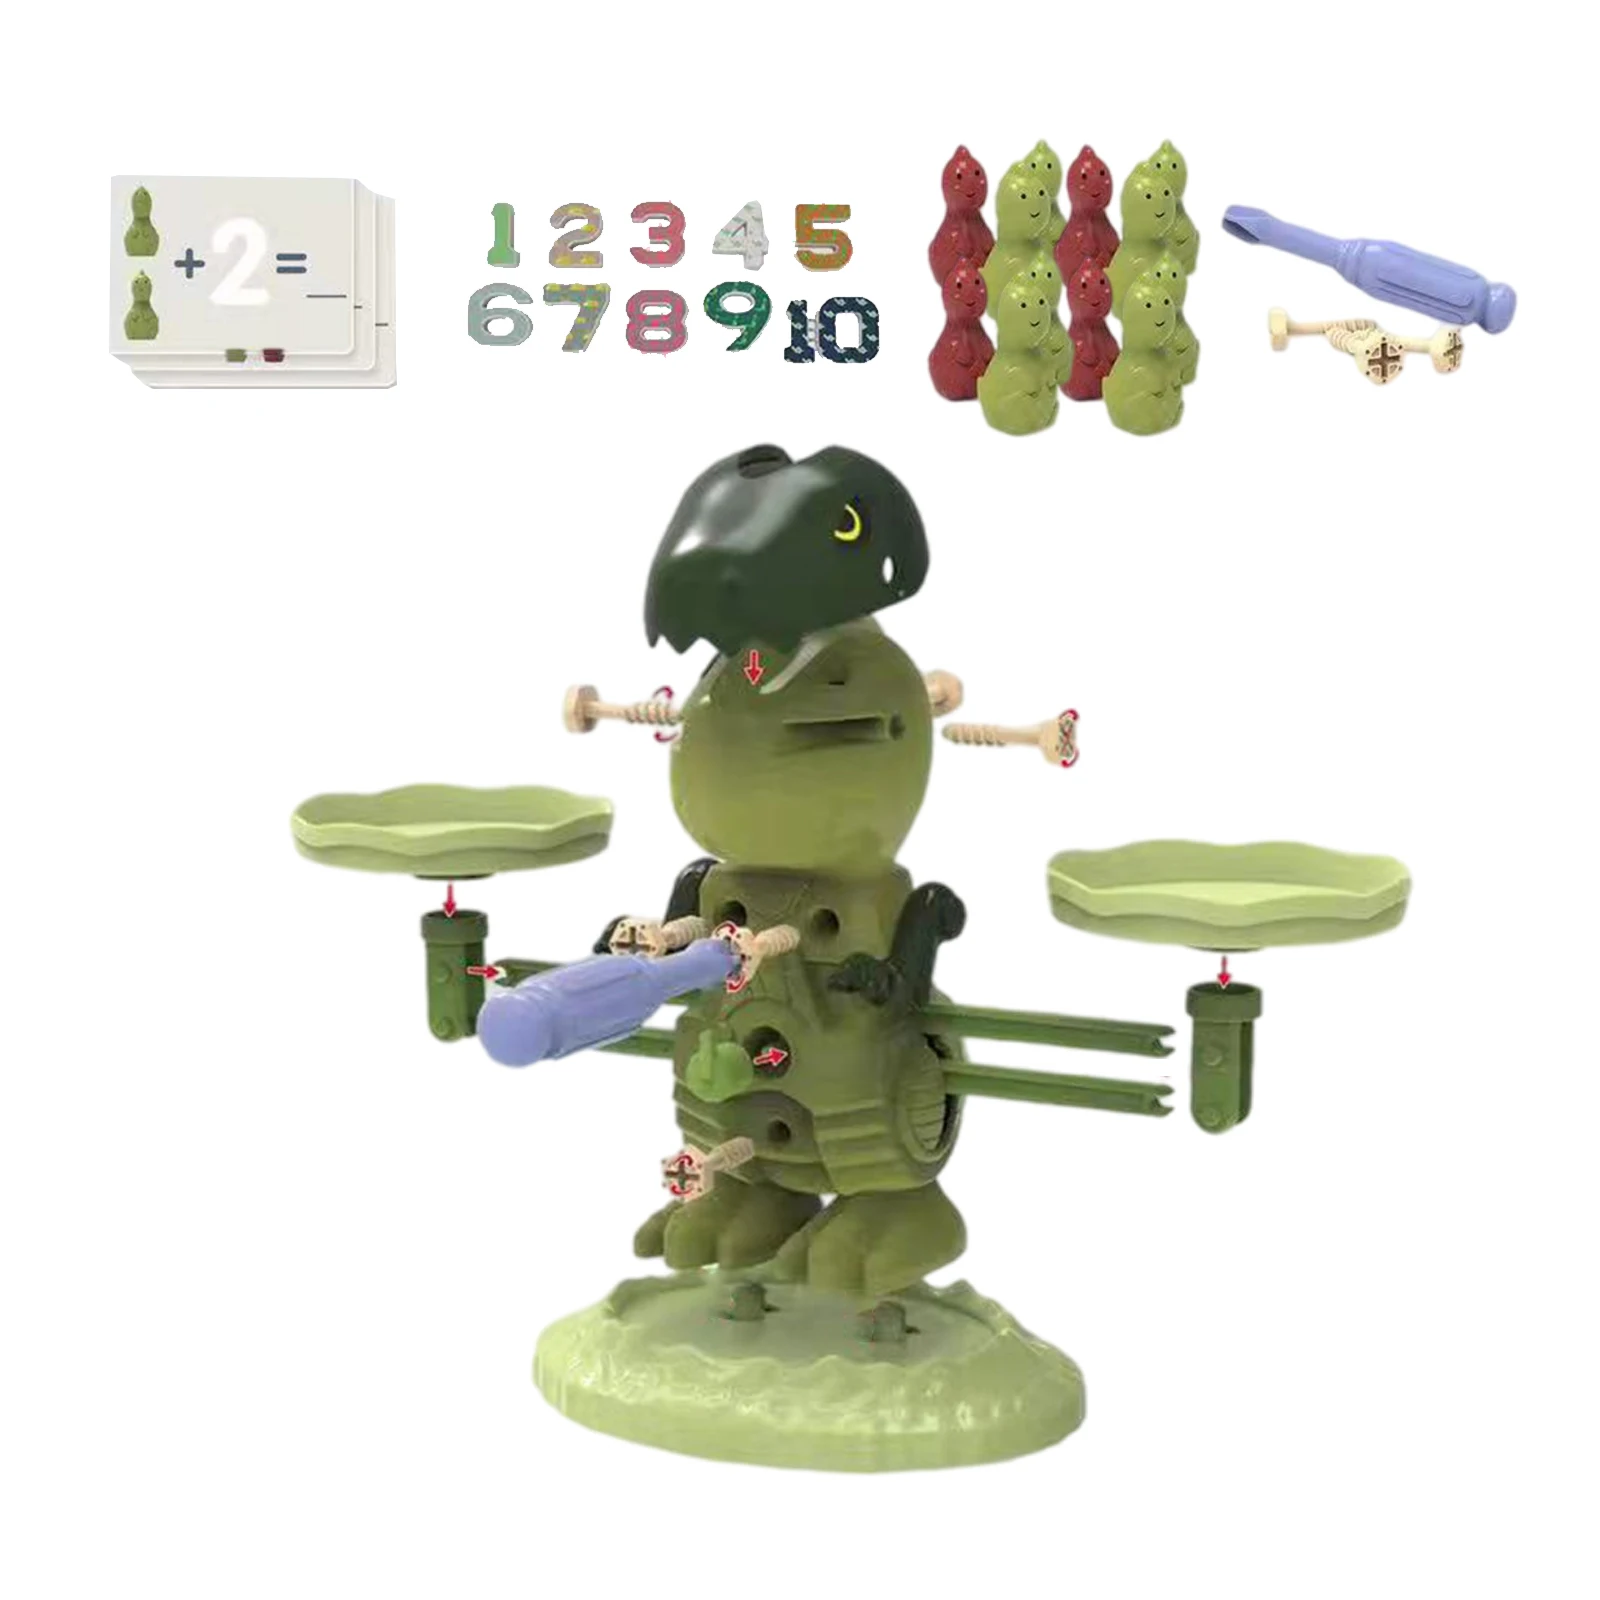 Cool Math Game, Dinosaur Balance Counting Toys for Boys & Girls Educational Number Toy Fun Children`s Gift STEM Learning Age 3+